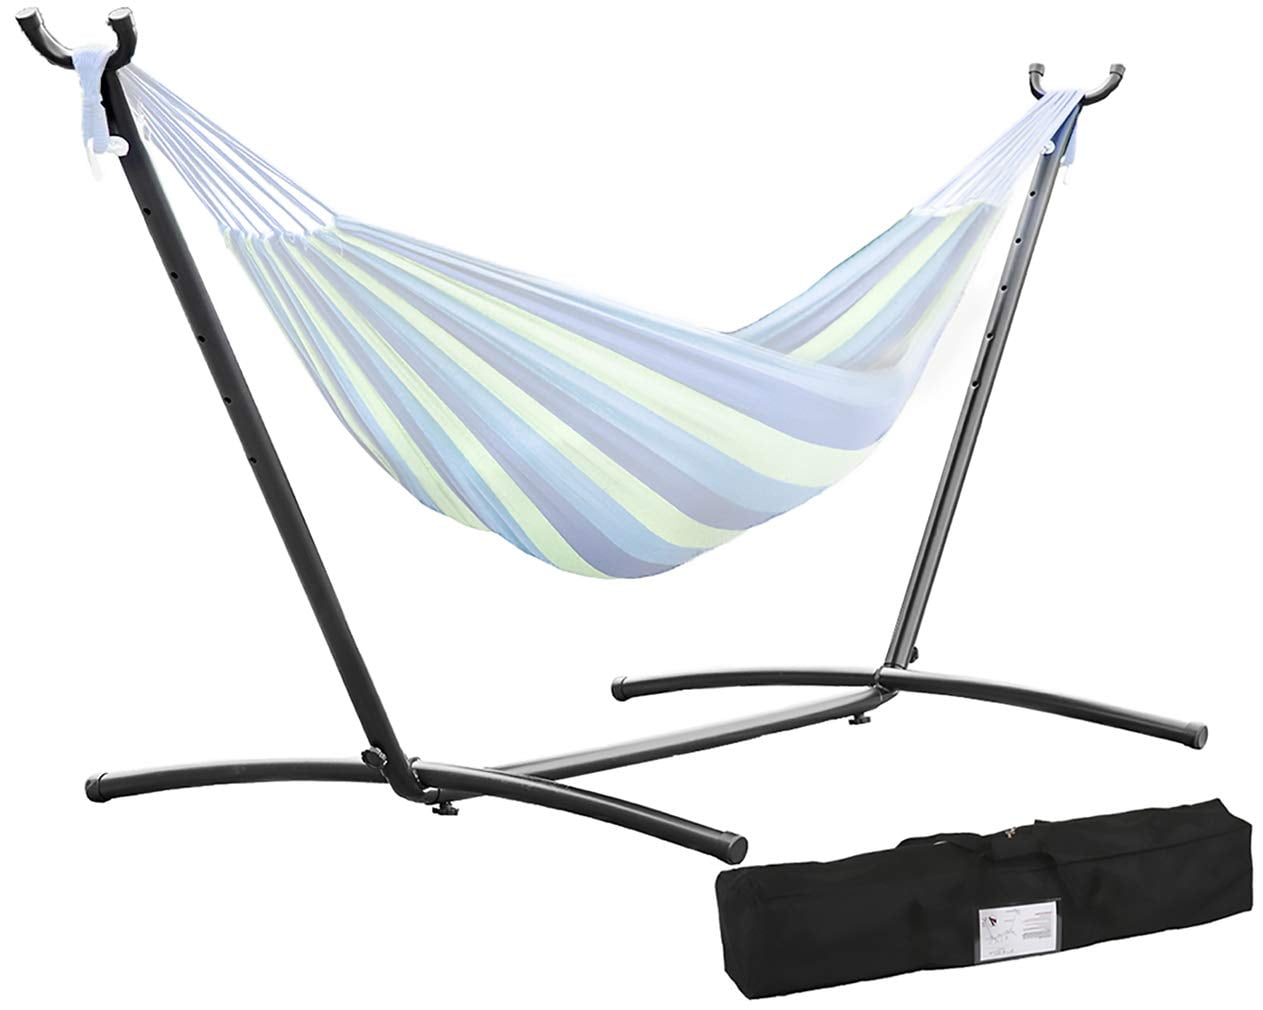 Hammock Stand With Space Saving Steel Stand Includes Carrying Case US STOCK 